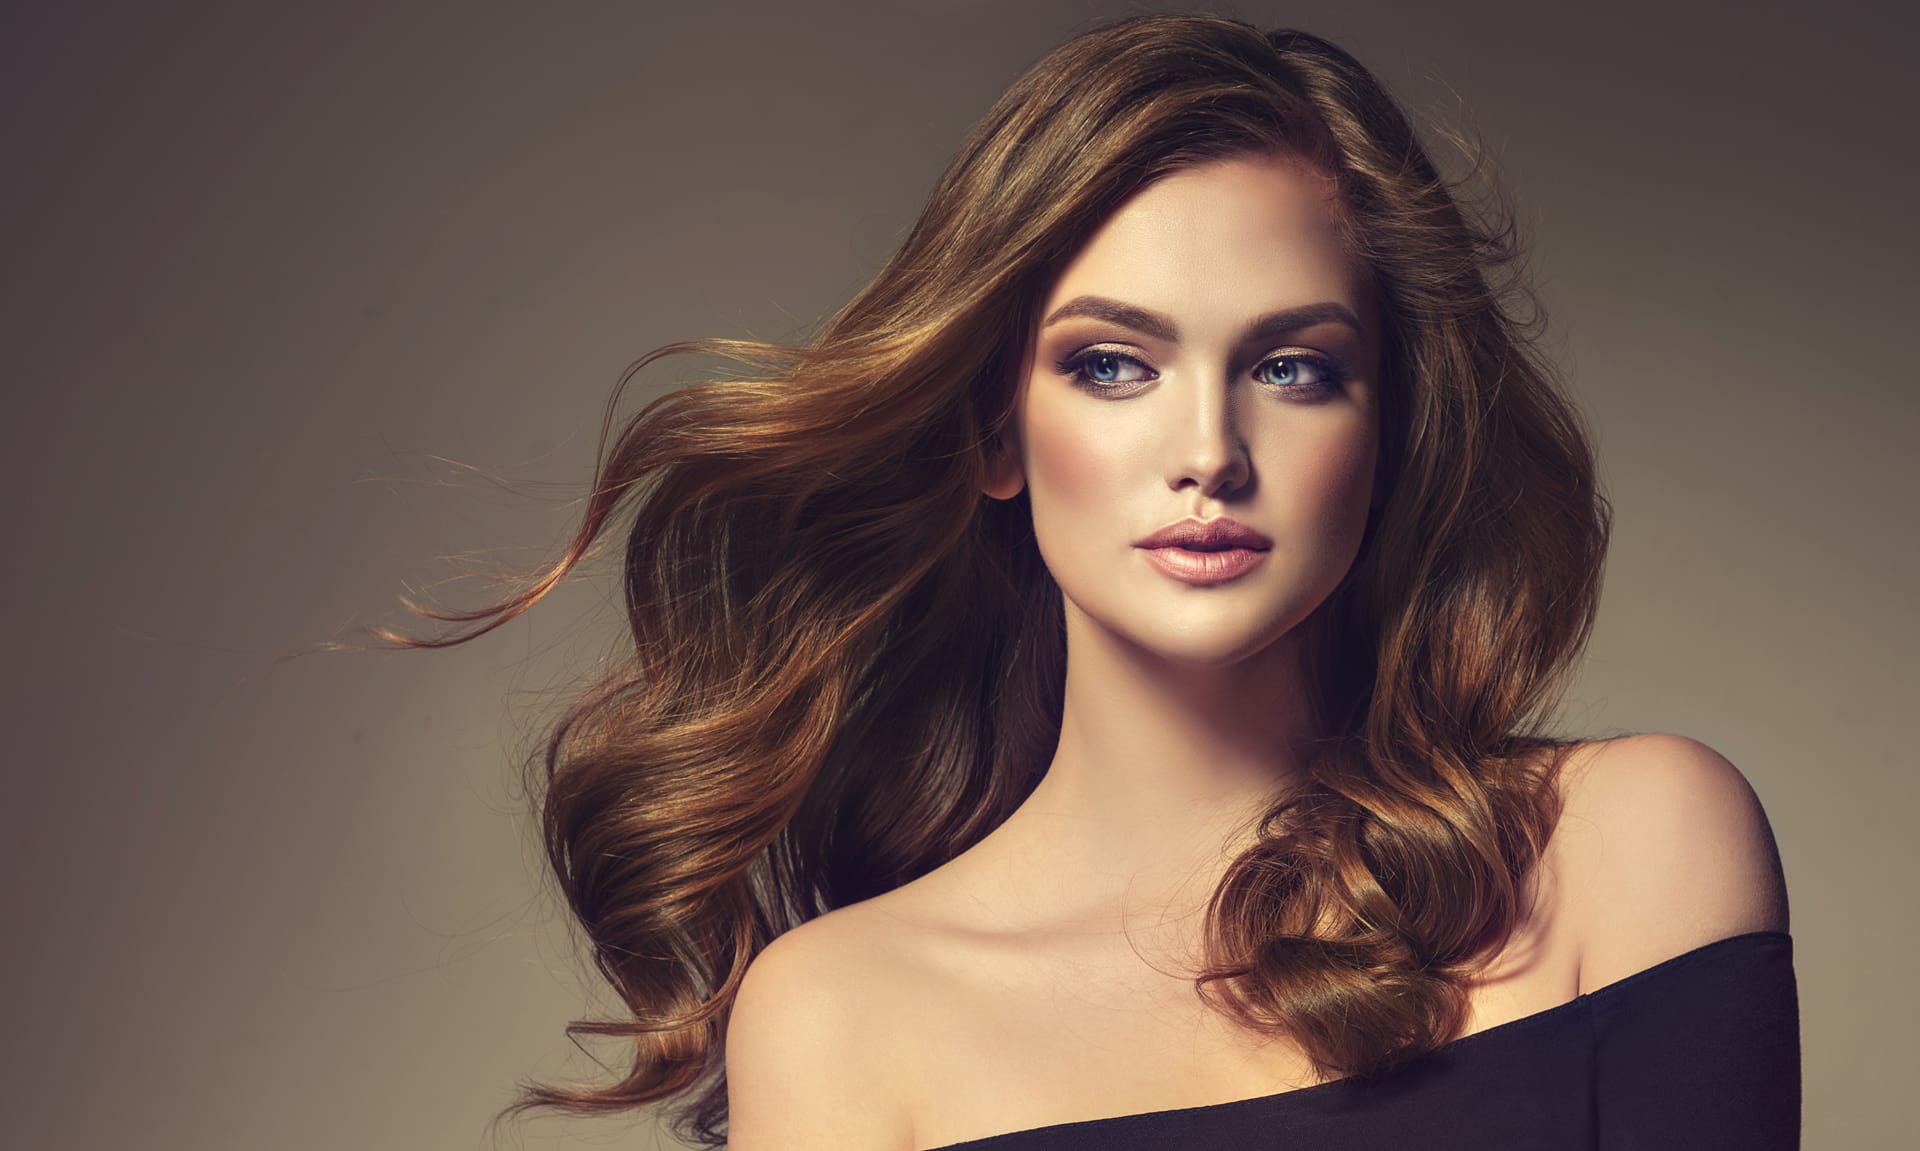 Model with long wavy well groomed hair hair care makeup flying hair